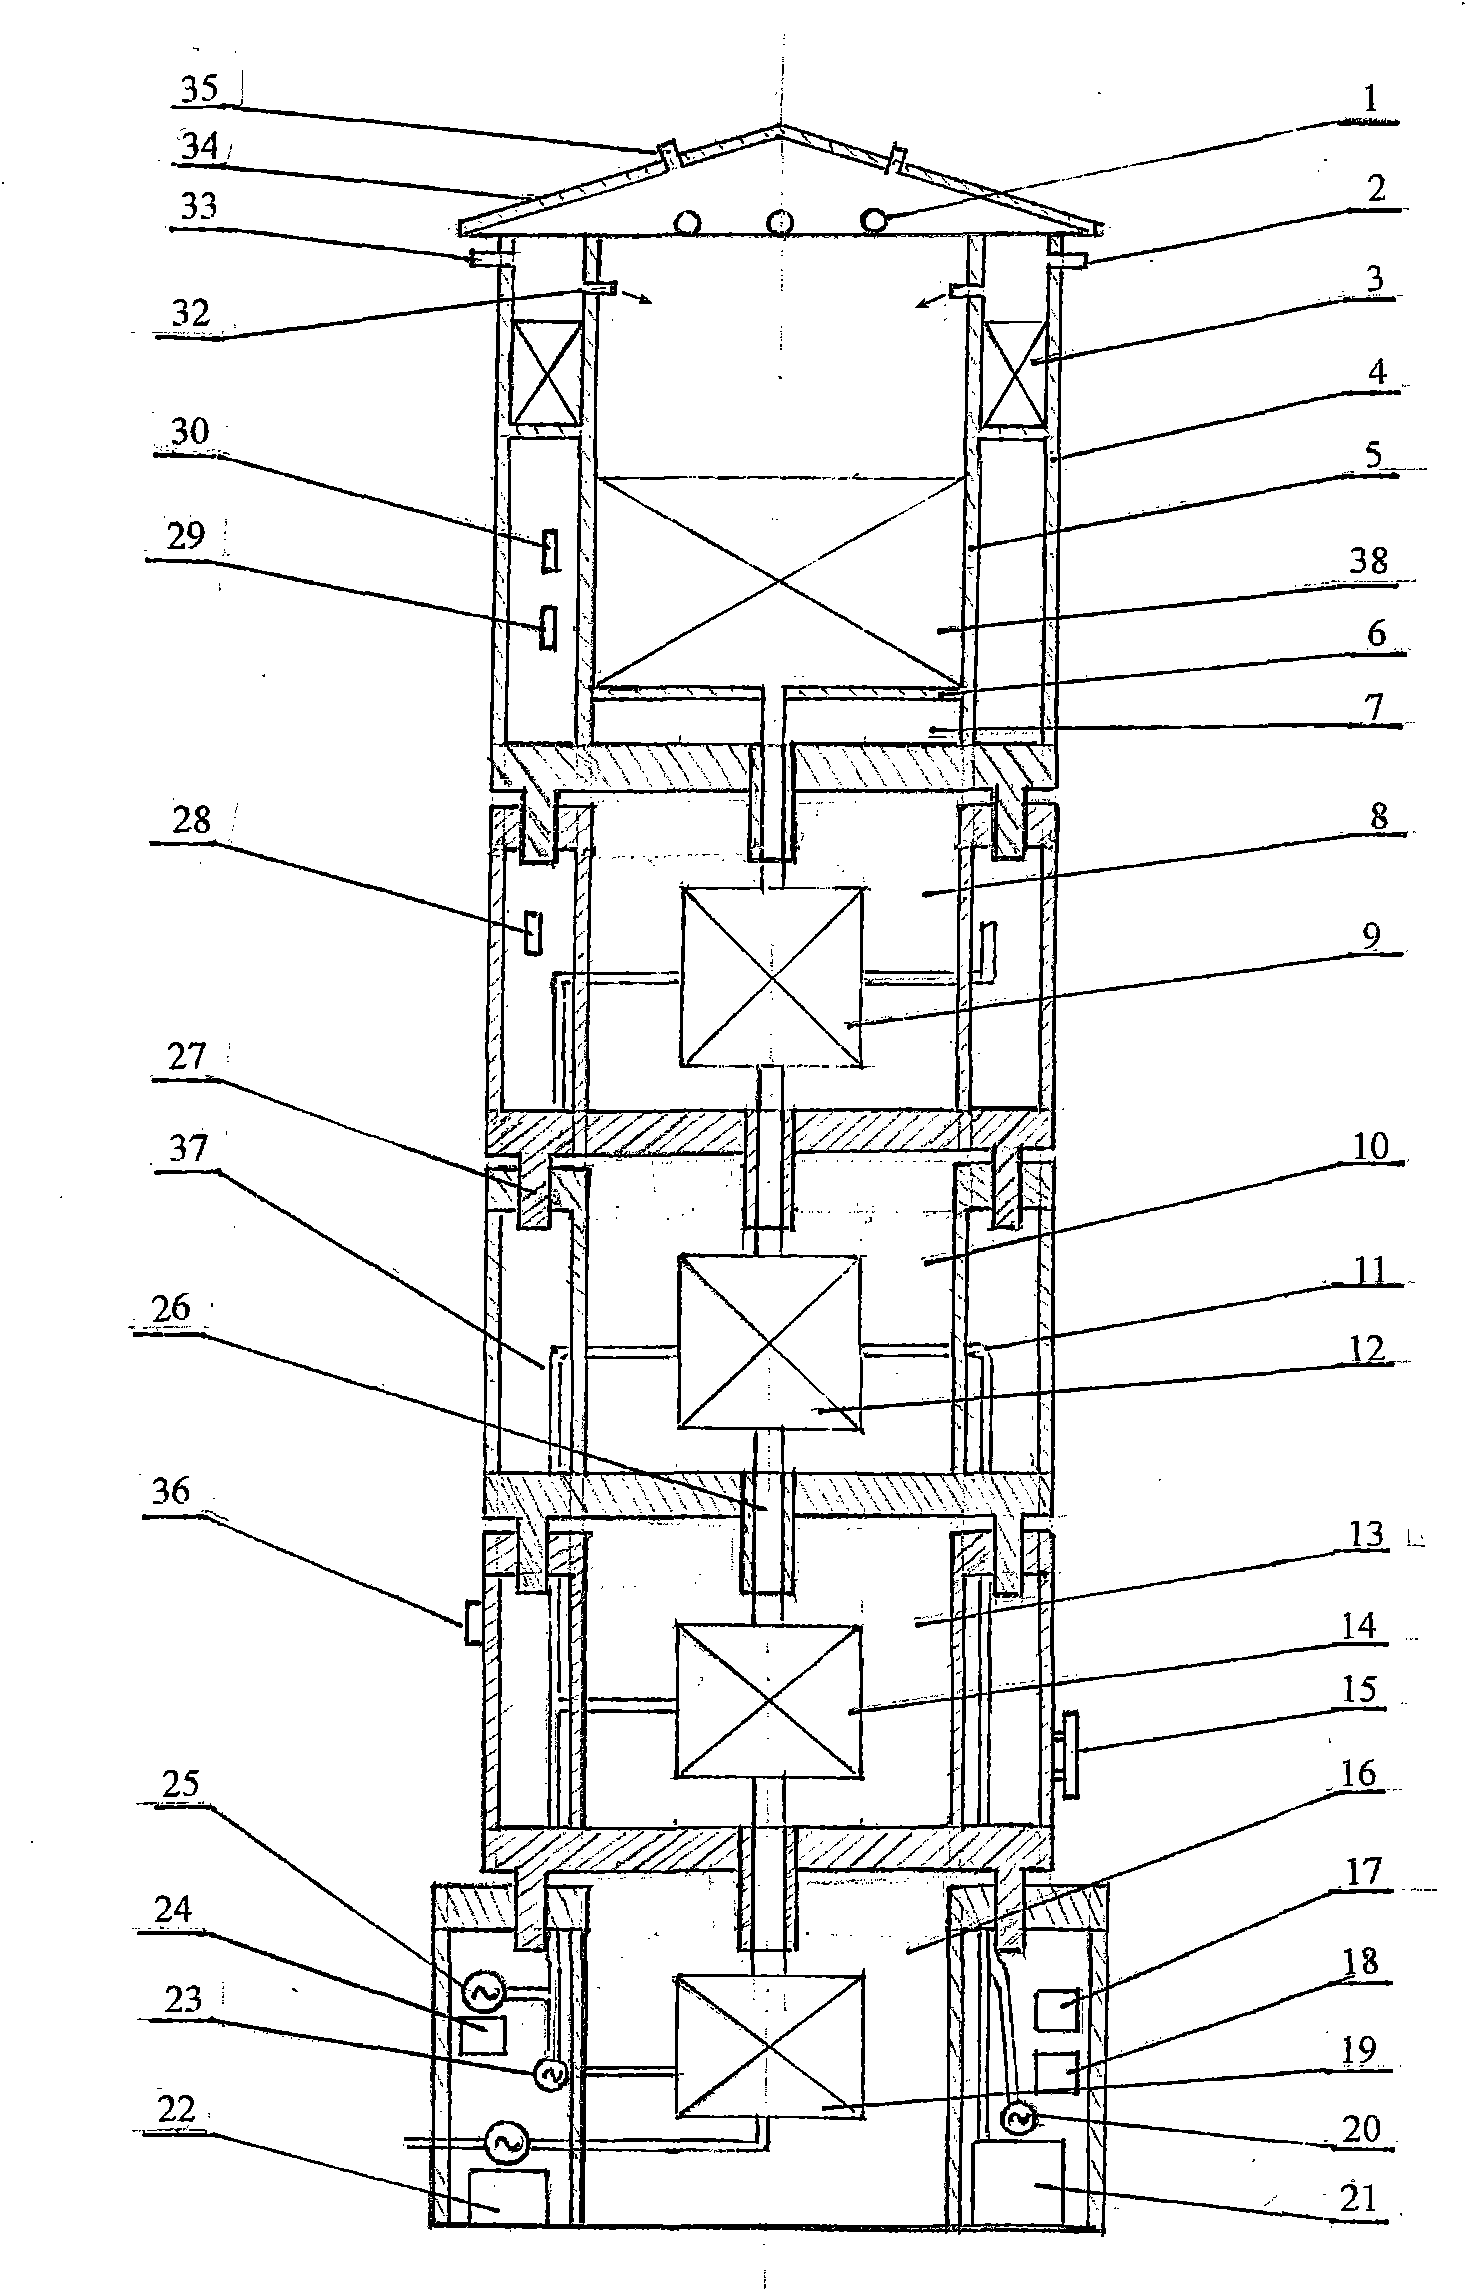 Device for filtering various water sources into direct drinking water